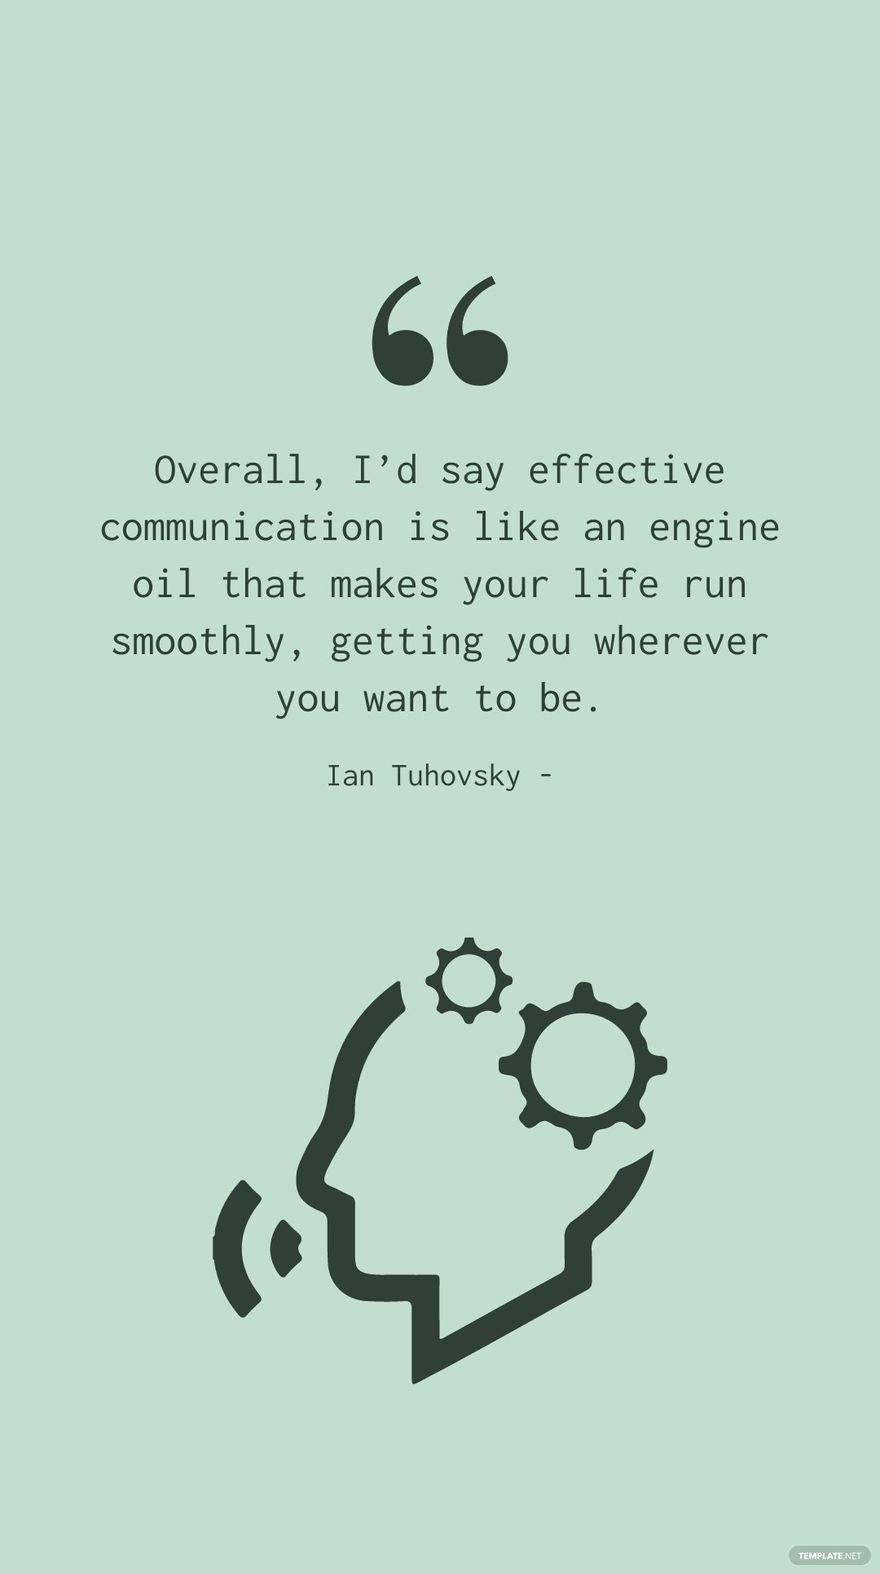 Ian Tuhovsky - Overall, I’d say effective communication is like an engine oil that makes your life run smoothly, getting you wherever you want to be.